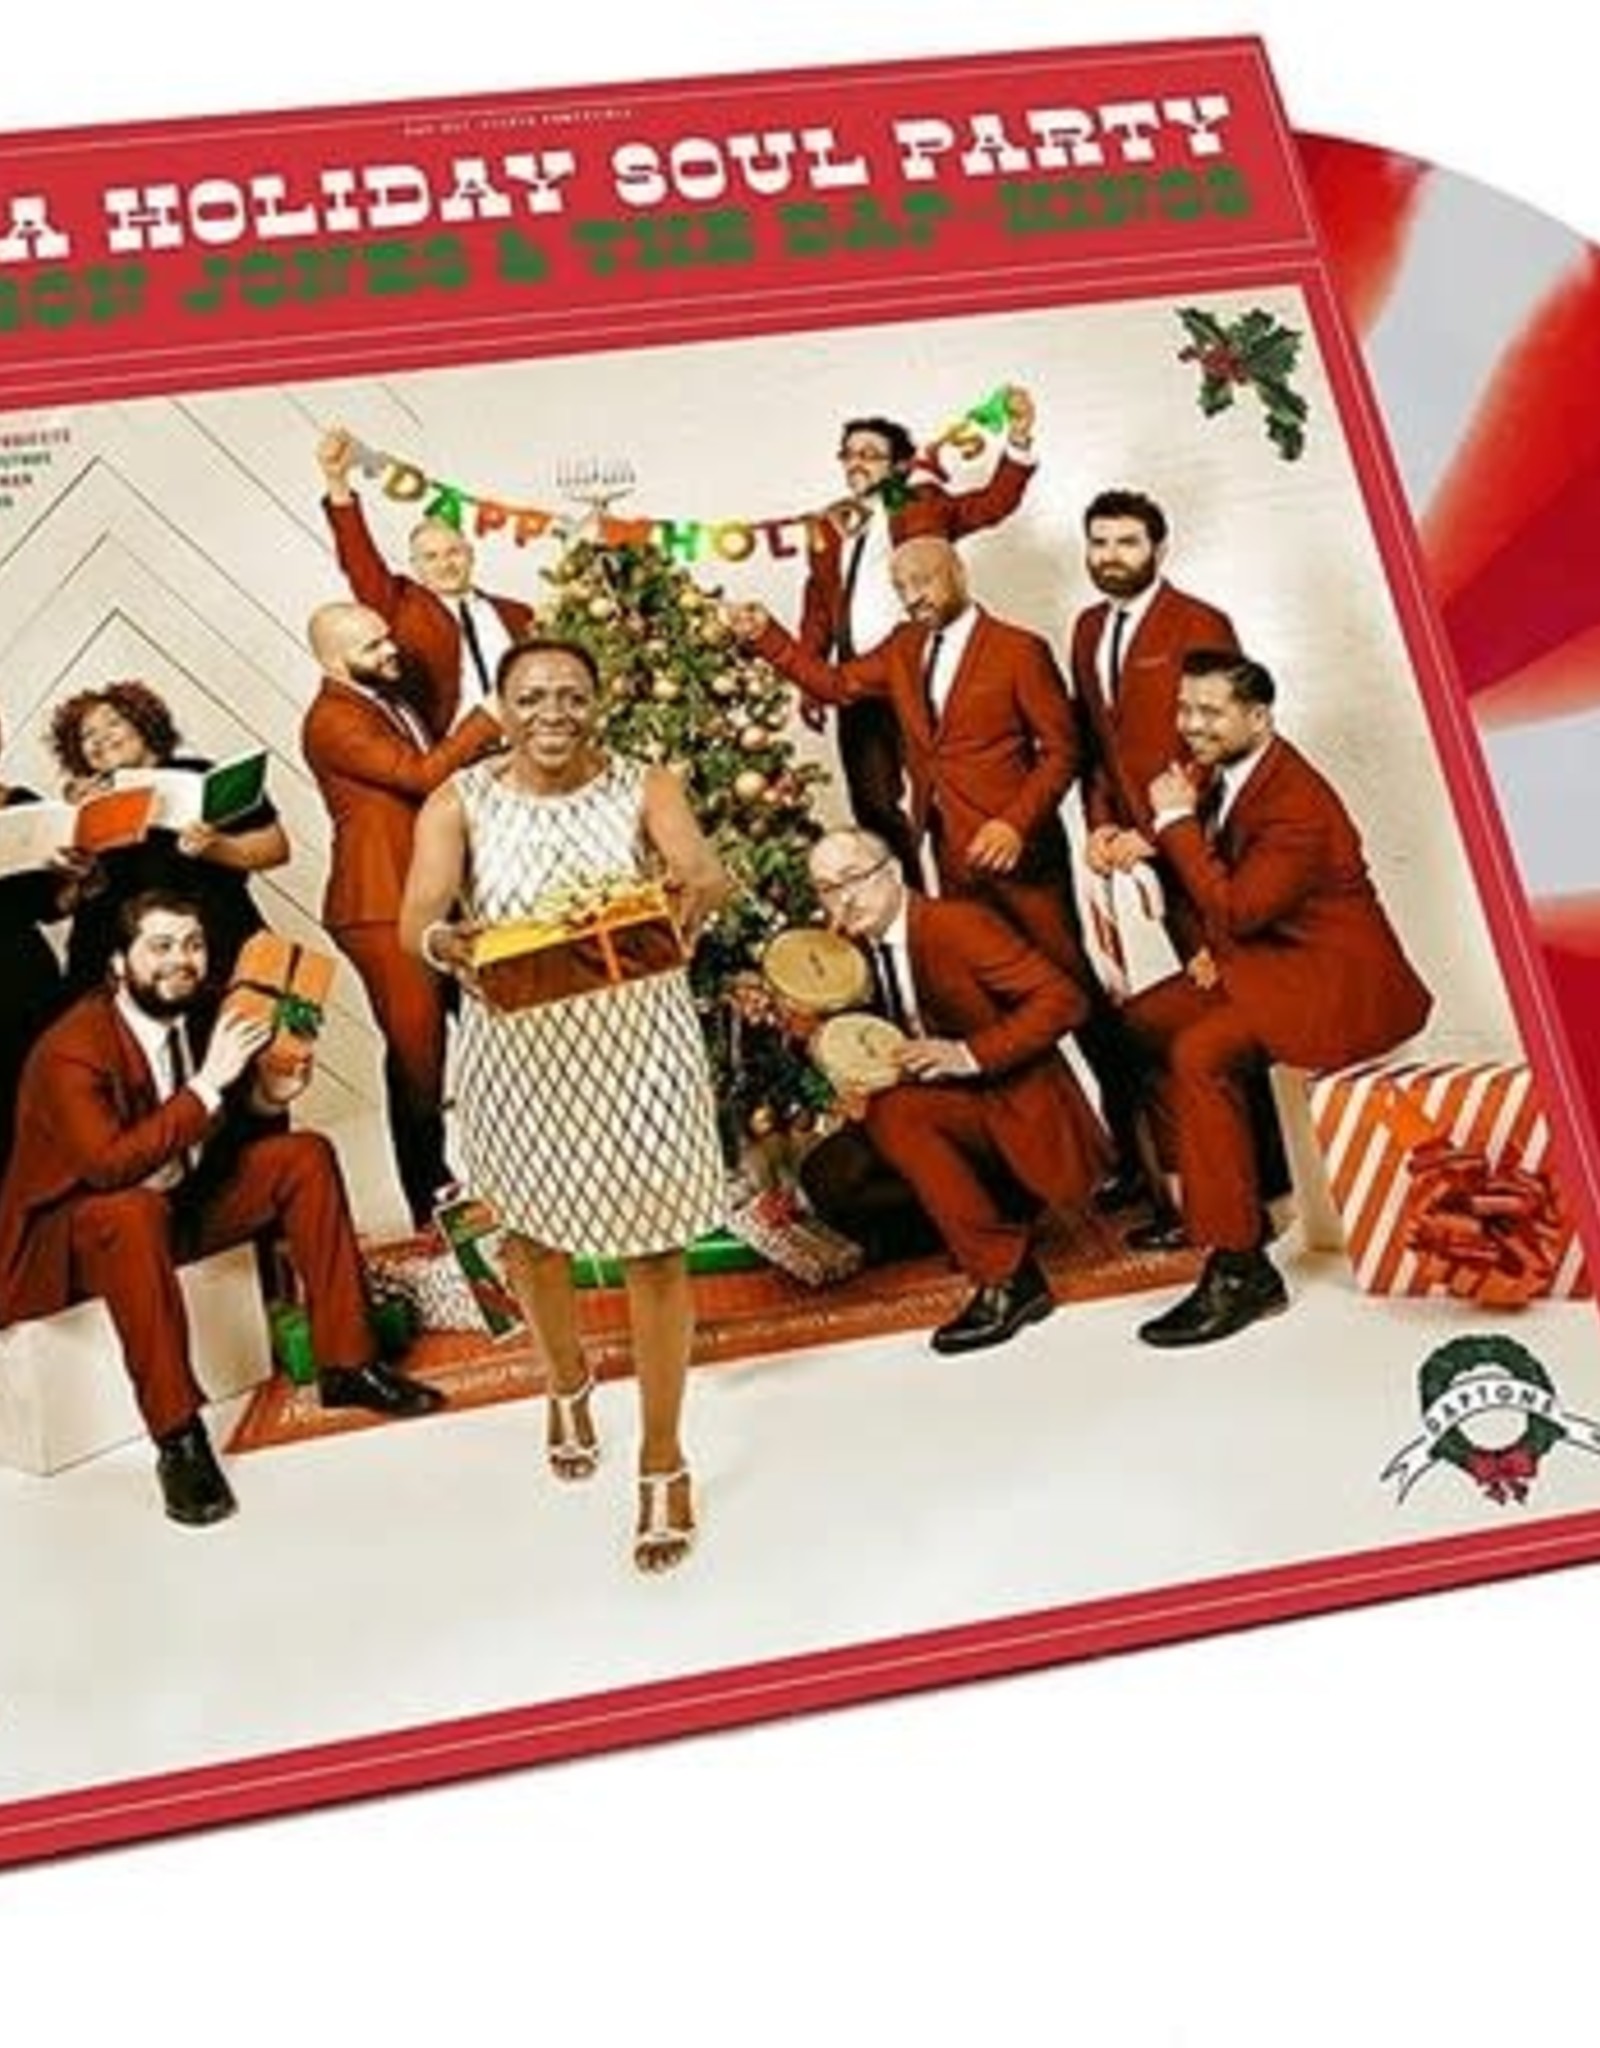 Sharon Jones & the Dap-Kings - It's A Holiday Soul Party (Candy Cane Color Vinyl)